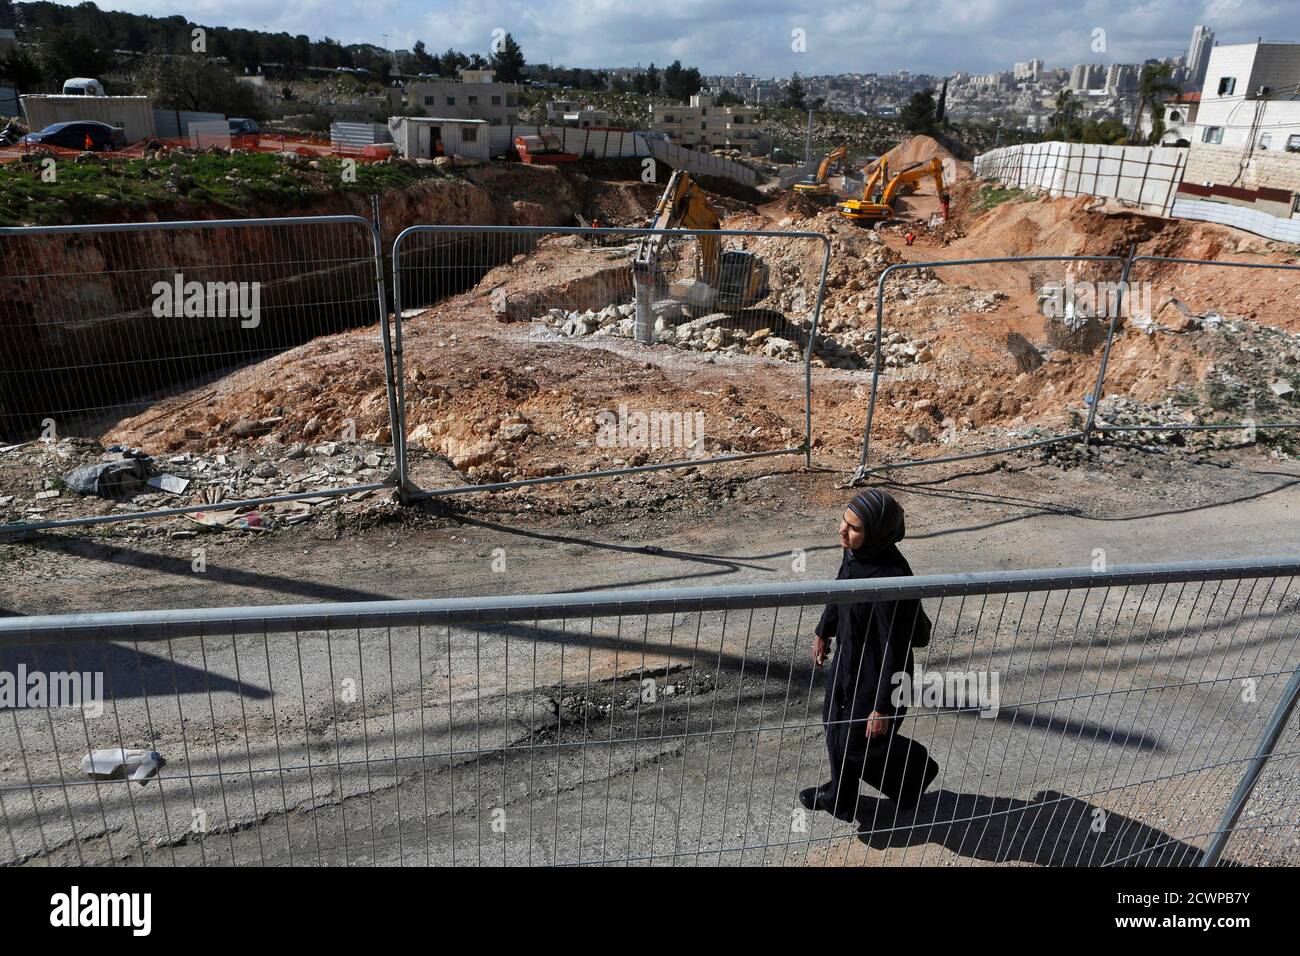 A woman walks past a road under construction in the Arab neighbourhood of Beit Safafa in Jerusalem February 28, 2013. The mechanical diggers start work soon after dawn, cutting through a leafy village on the outskirts of Jerusalem to build a six-lane highway that has become the latest focal point of Arab-Israeli discontent. The road leads directly to Jewish settlements, built on occupied land around the foothills of Bethlehem. When finished, it will allow the settlers to speed down to Israel's thriving coastal plains, unhindered by traffic lights or roundabouts.  Their gain is coming at the ex Stock Photo